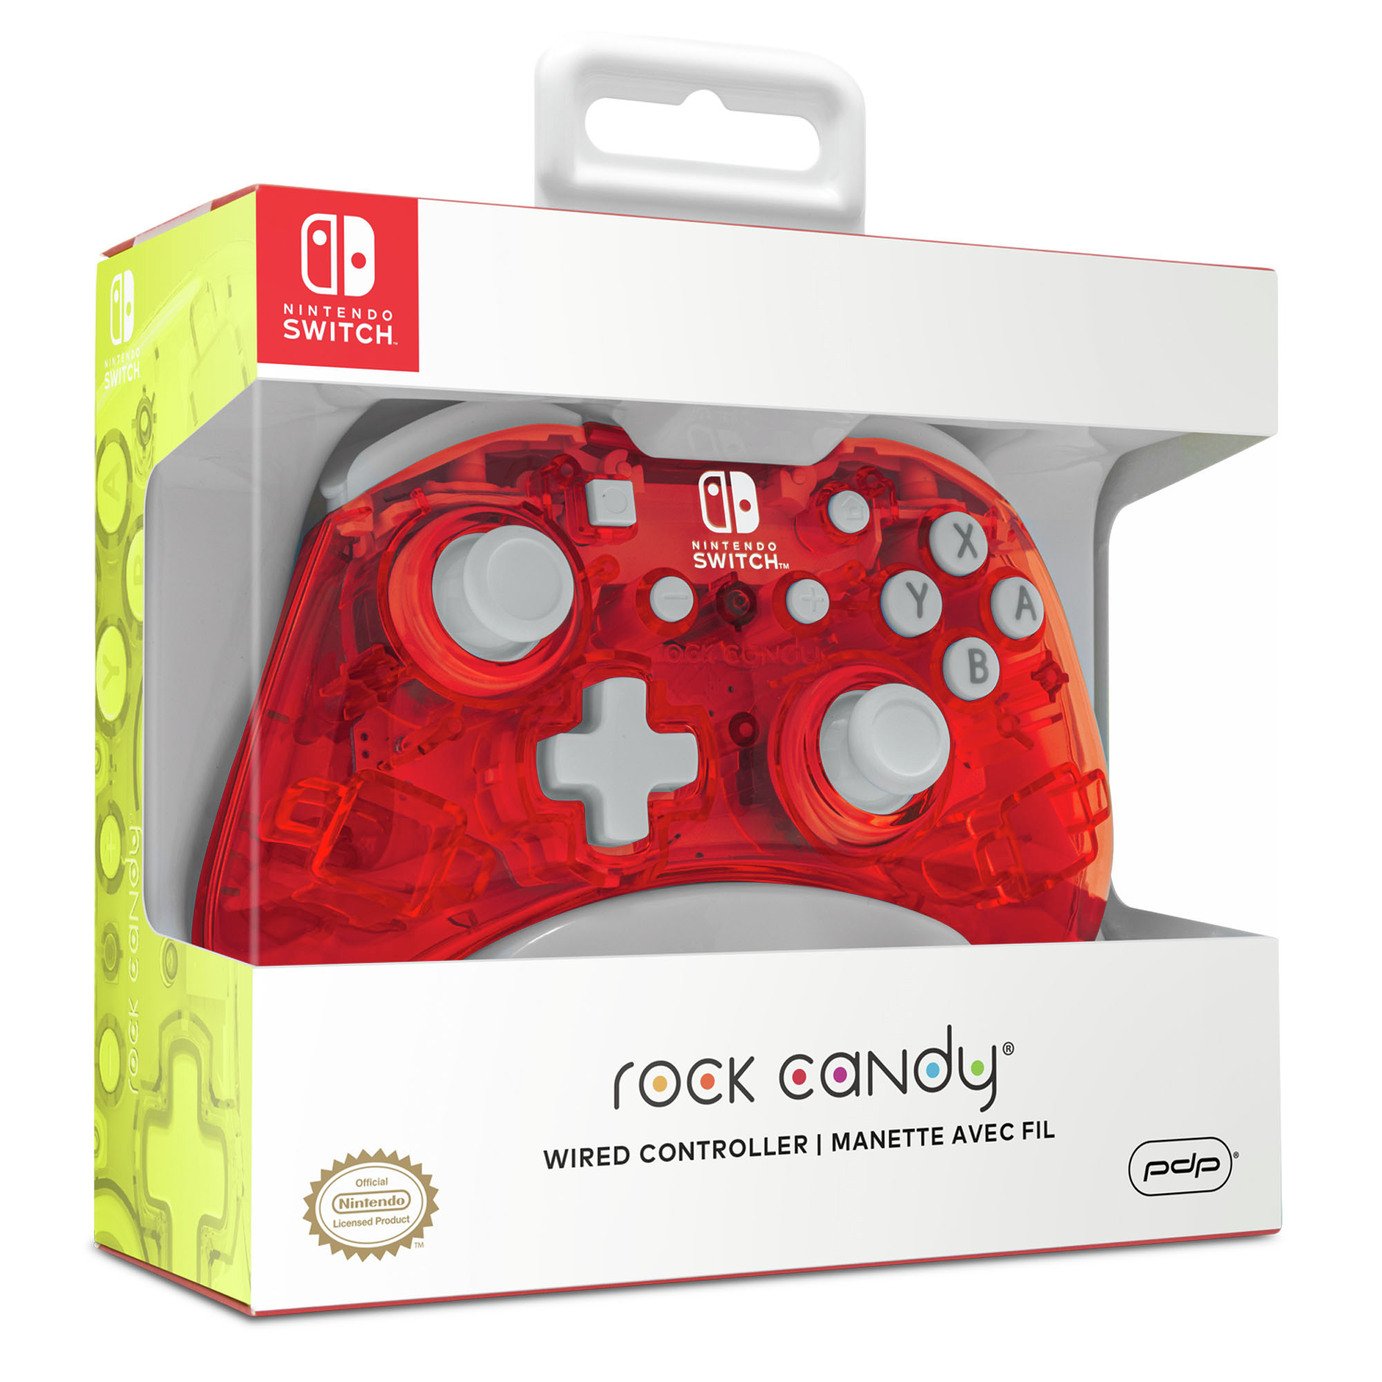 PDP Rock Candy Nintendo Switch Wired Controller Review